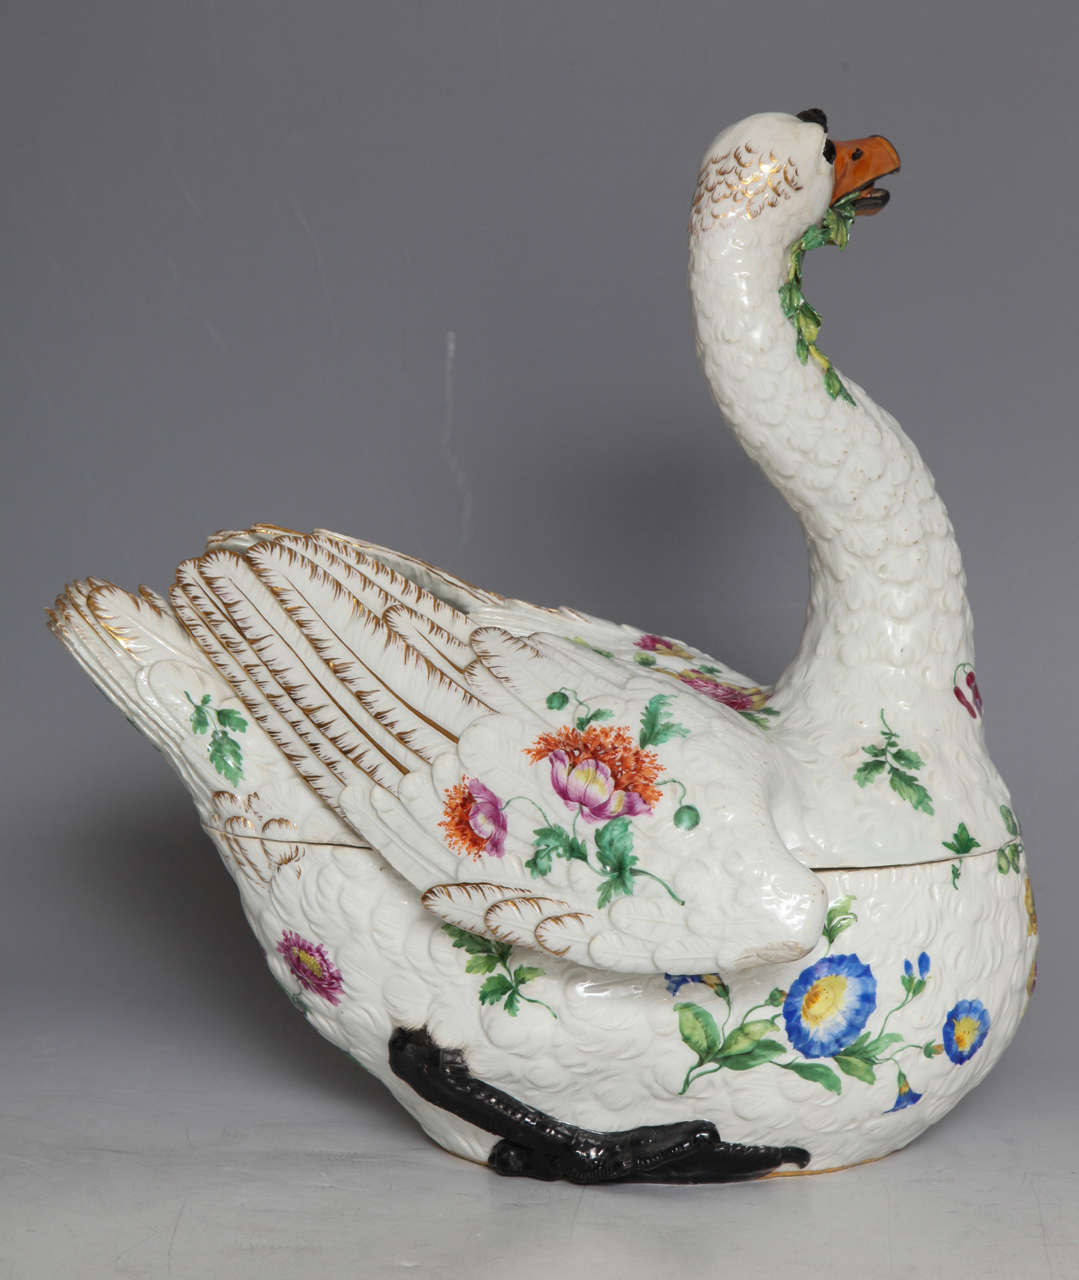 A large 18th century Meissen porcelain covered swan tureen with floral ornamentation. The swan serenely chews a leafy green while turning its head as if to rise. Delicate floral motifs dot the swan's body. Cobalt blue crossed swords mark and incised